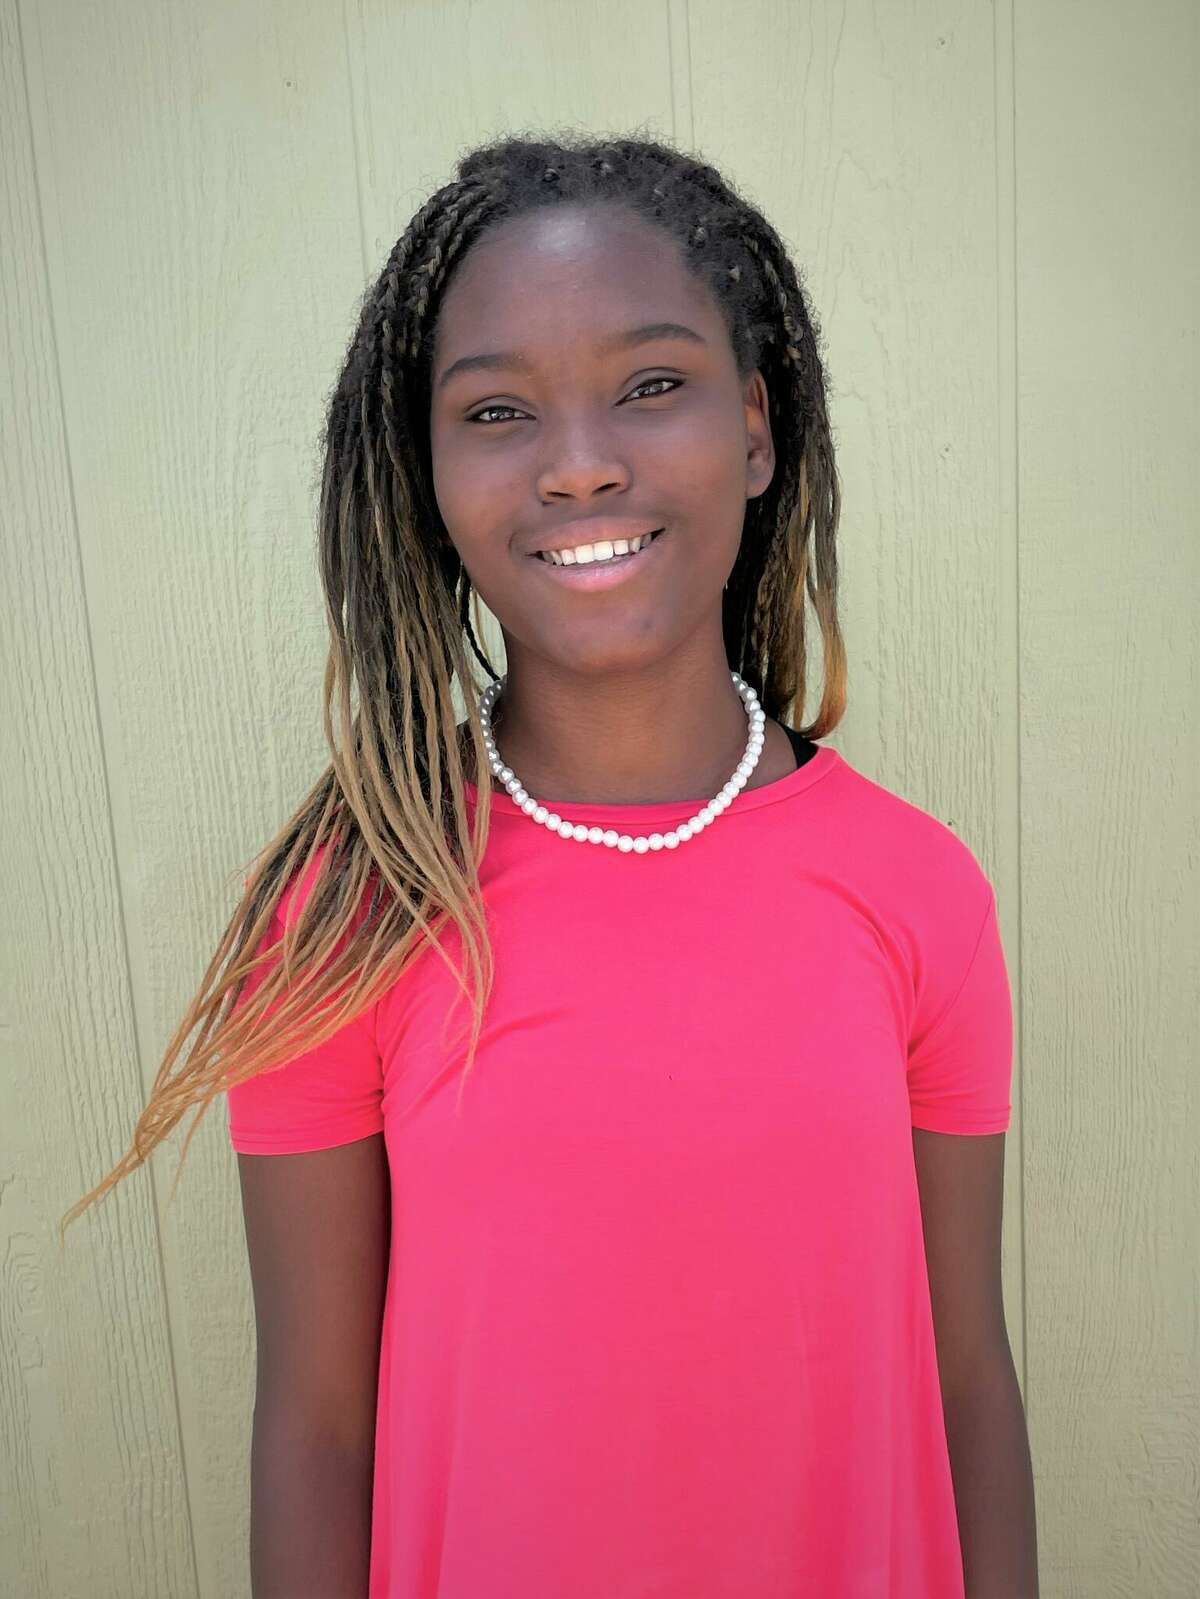 Kyra is among the children listed on the Texas Adoption Resource Exchange (TARE) website. Visit https://www.dfps.state.tx.us/Application/TARE/Home.aspx/Default for more details. 